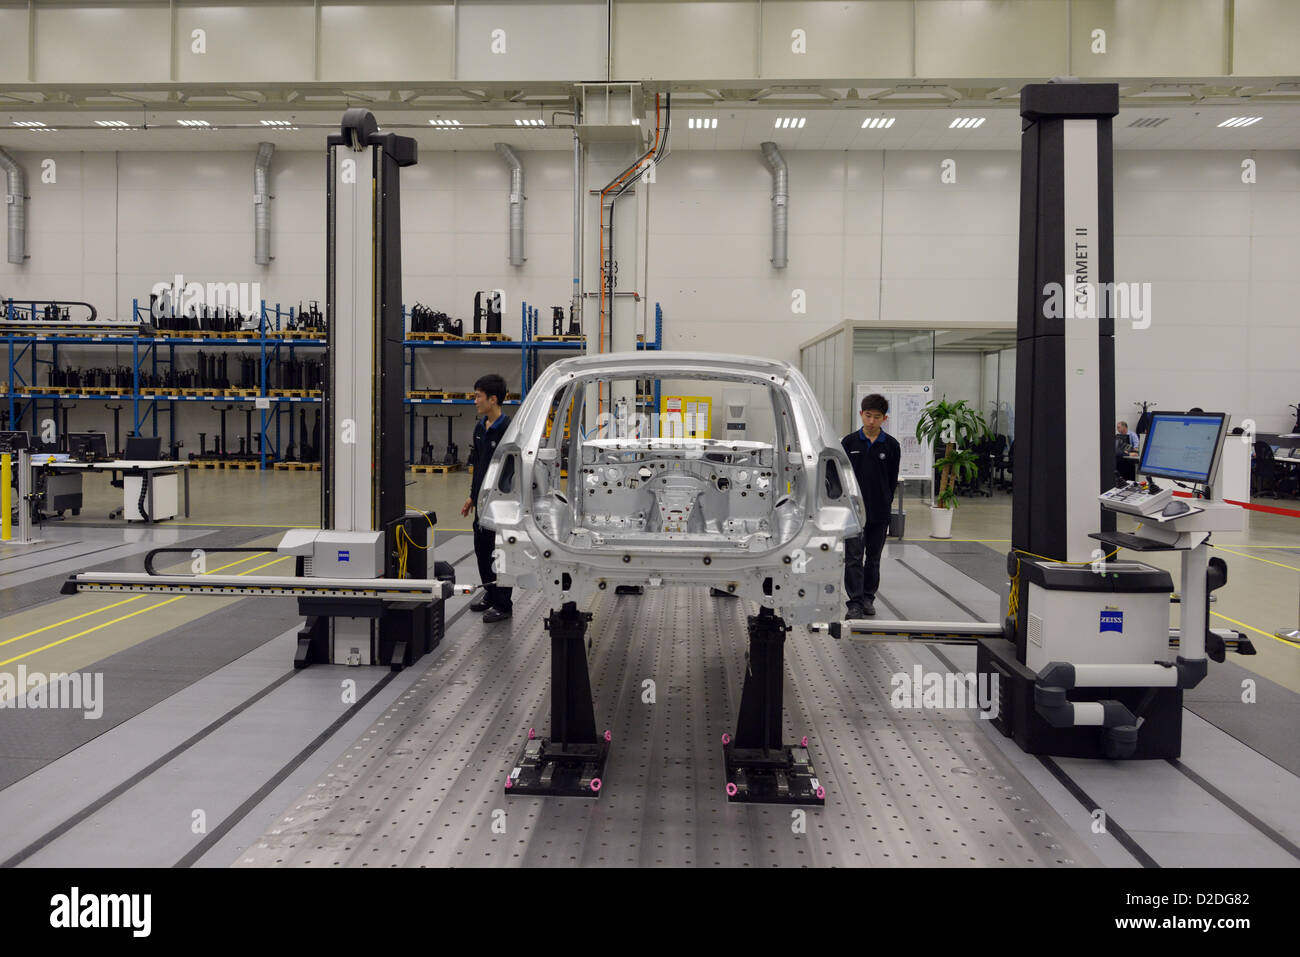 A body is measured at the production plant of BMW-Brilliance Automotive in Shenyang-Tiexi, China. Picture taken on 12 October 2012. Stock Photo